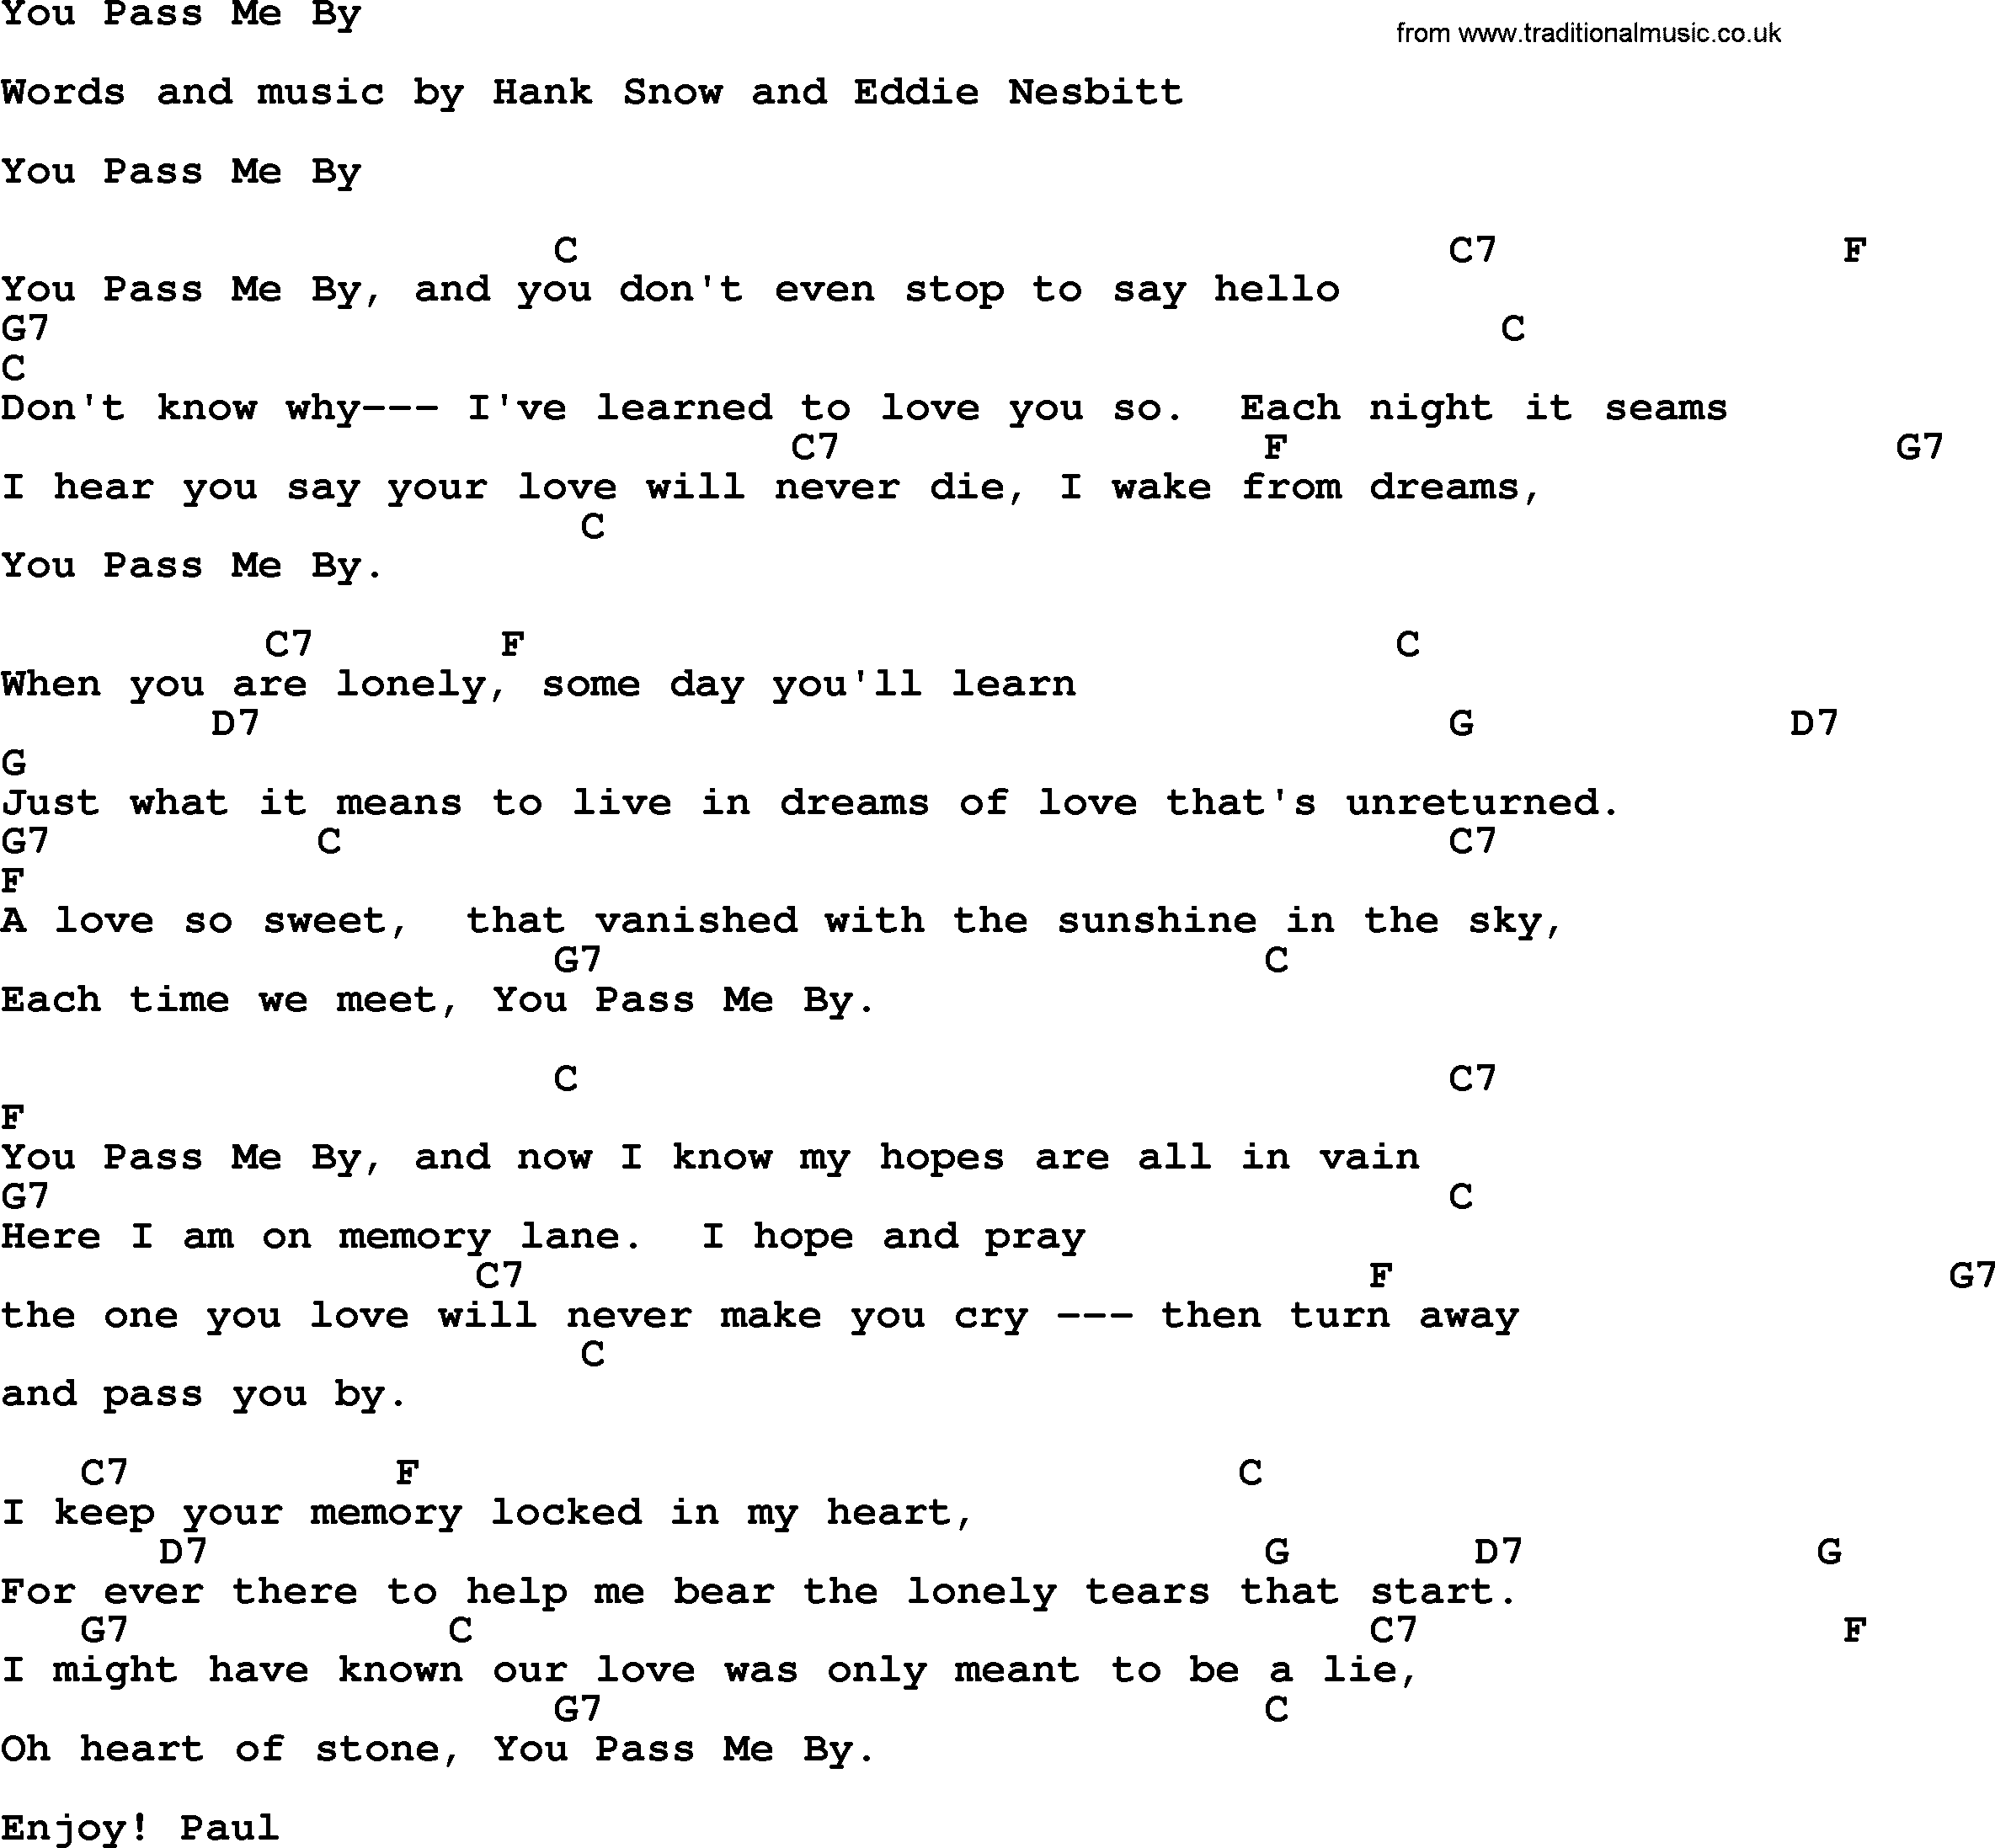 Bluegrass song: You Pass Me By, lyrics and chords